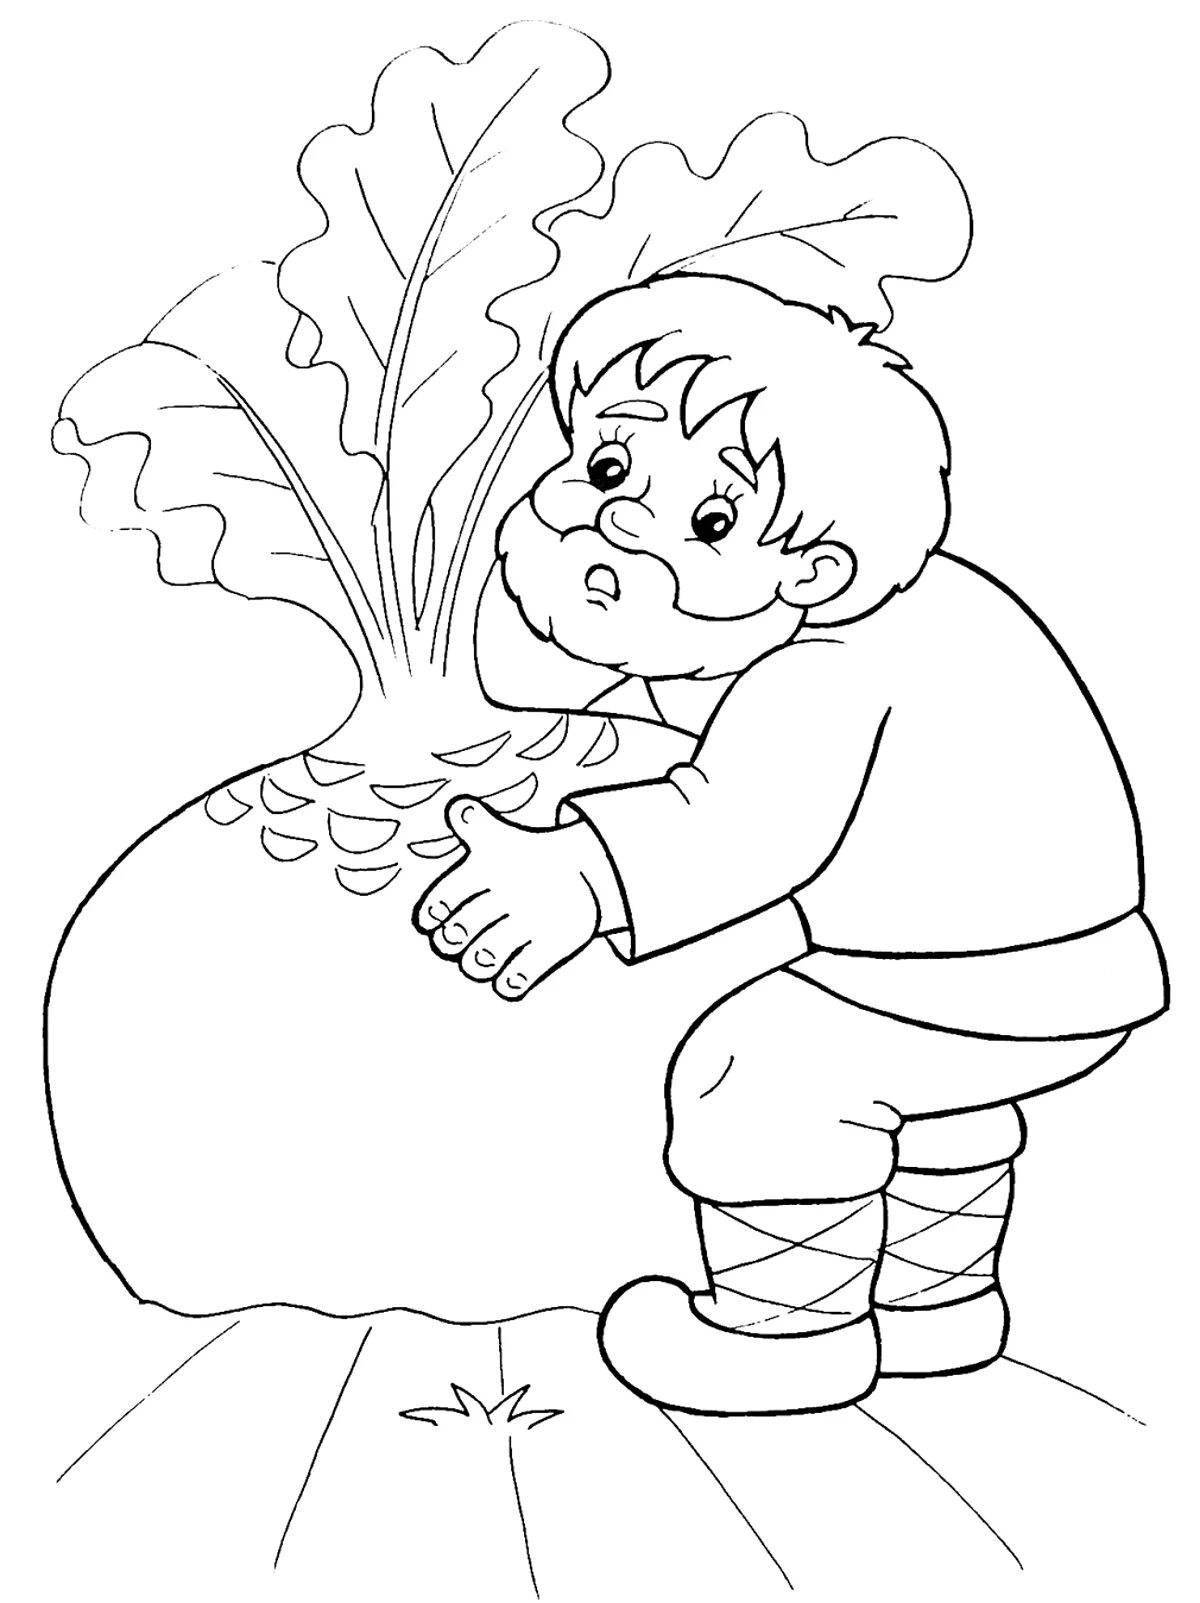 Colorful turnip coloring page